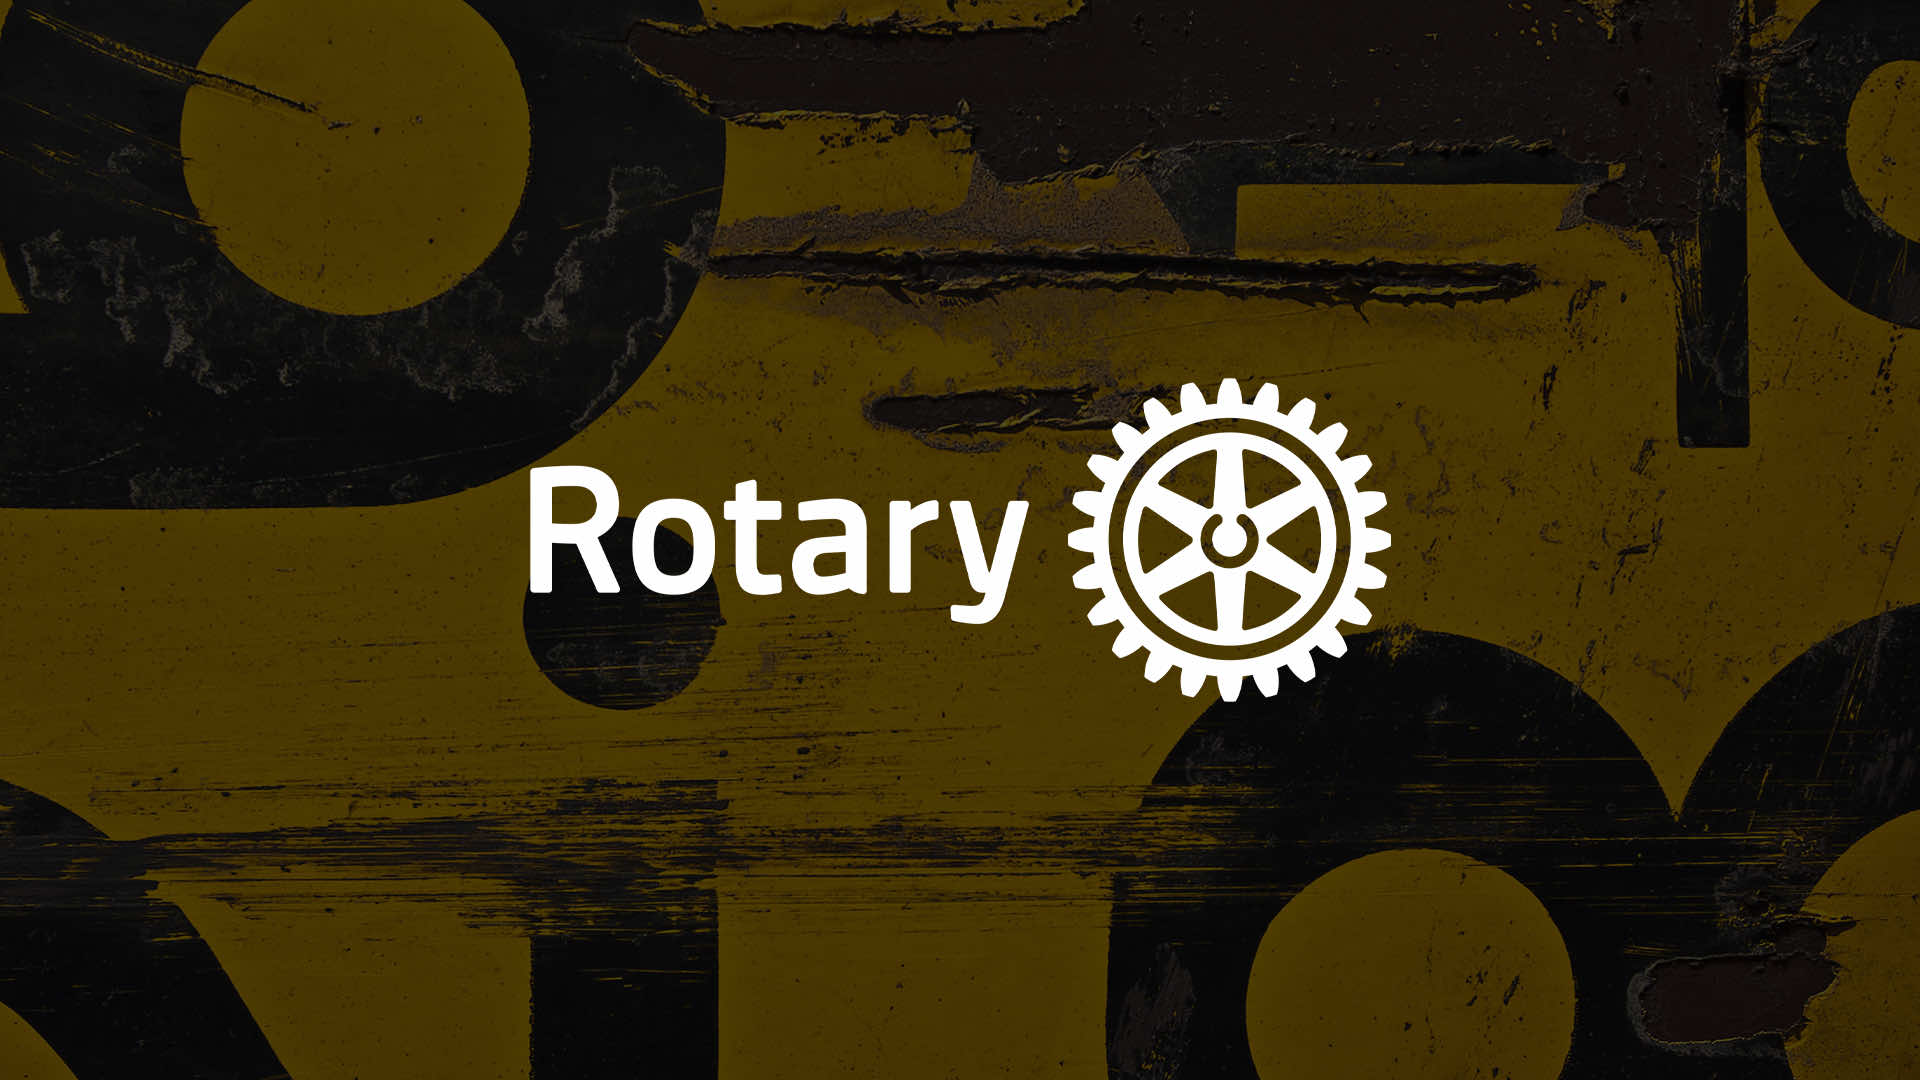 What's Rotary?